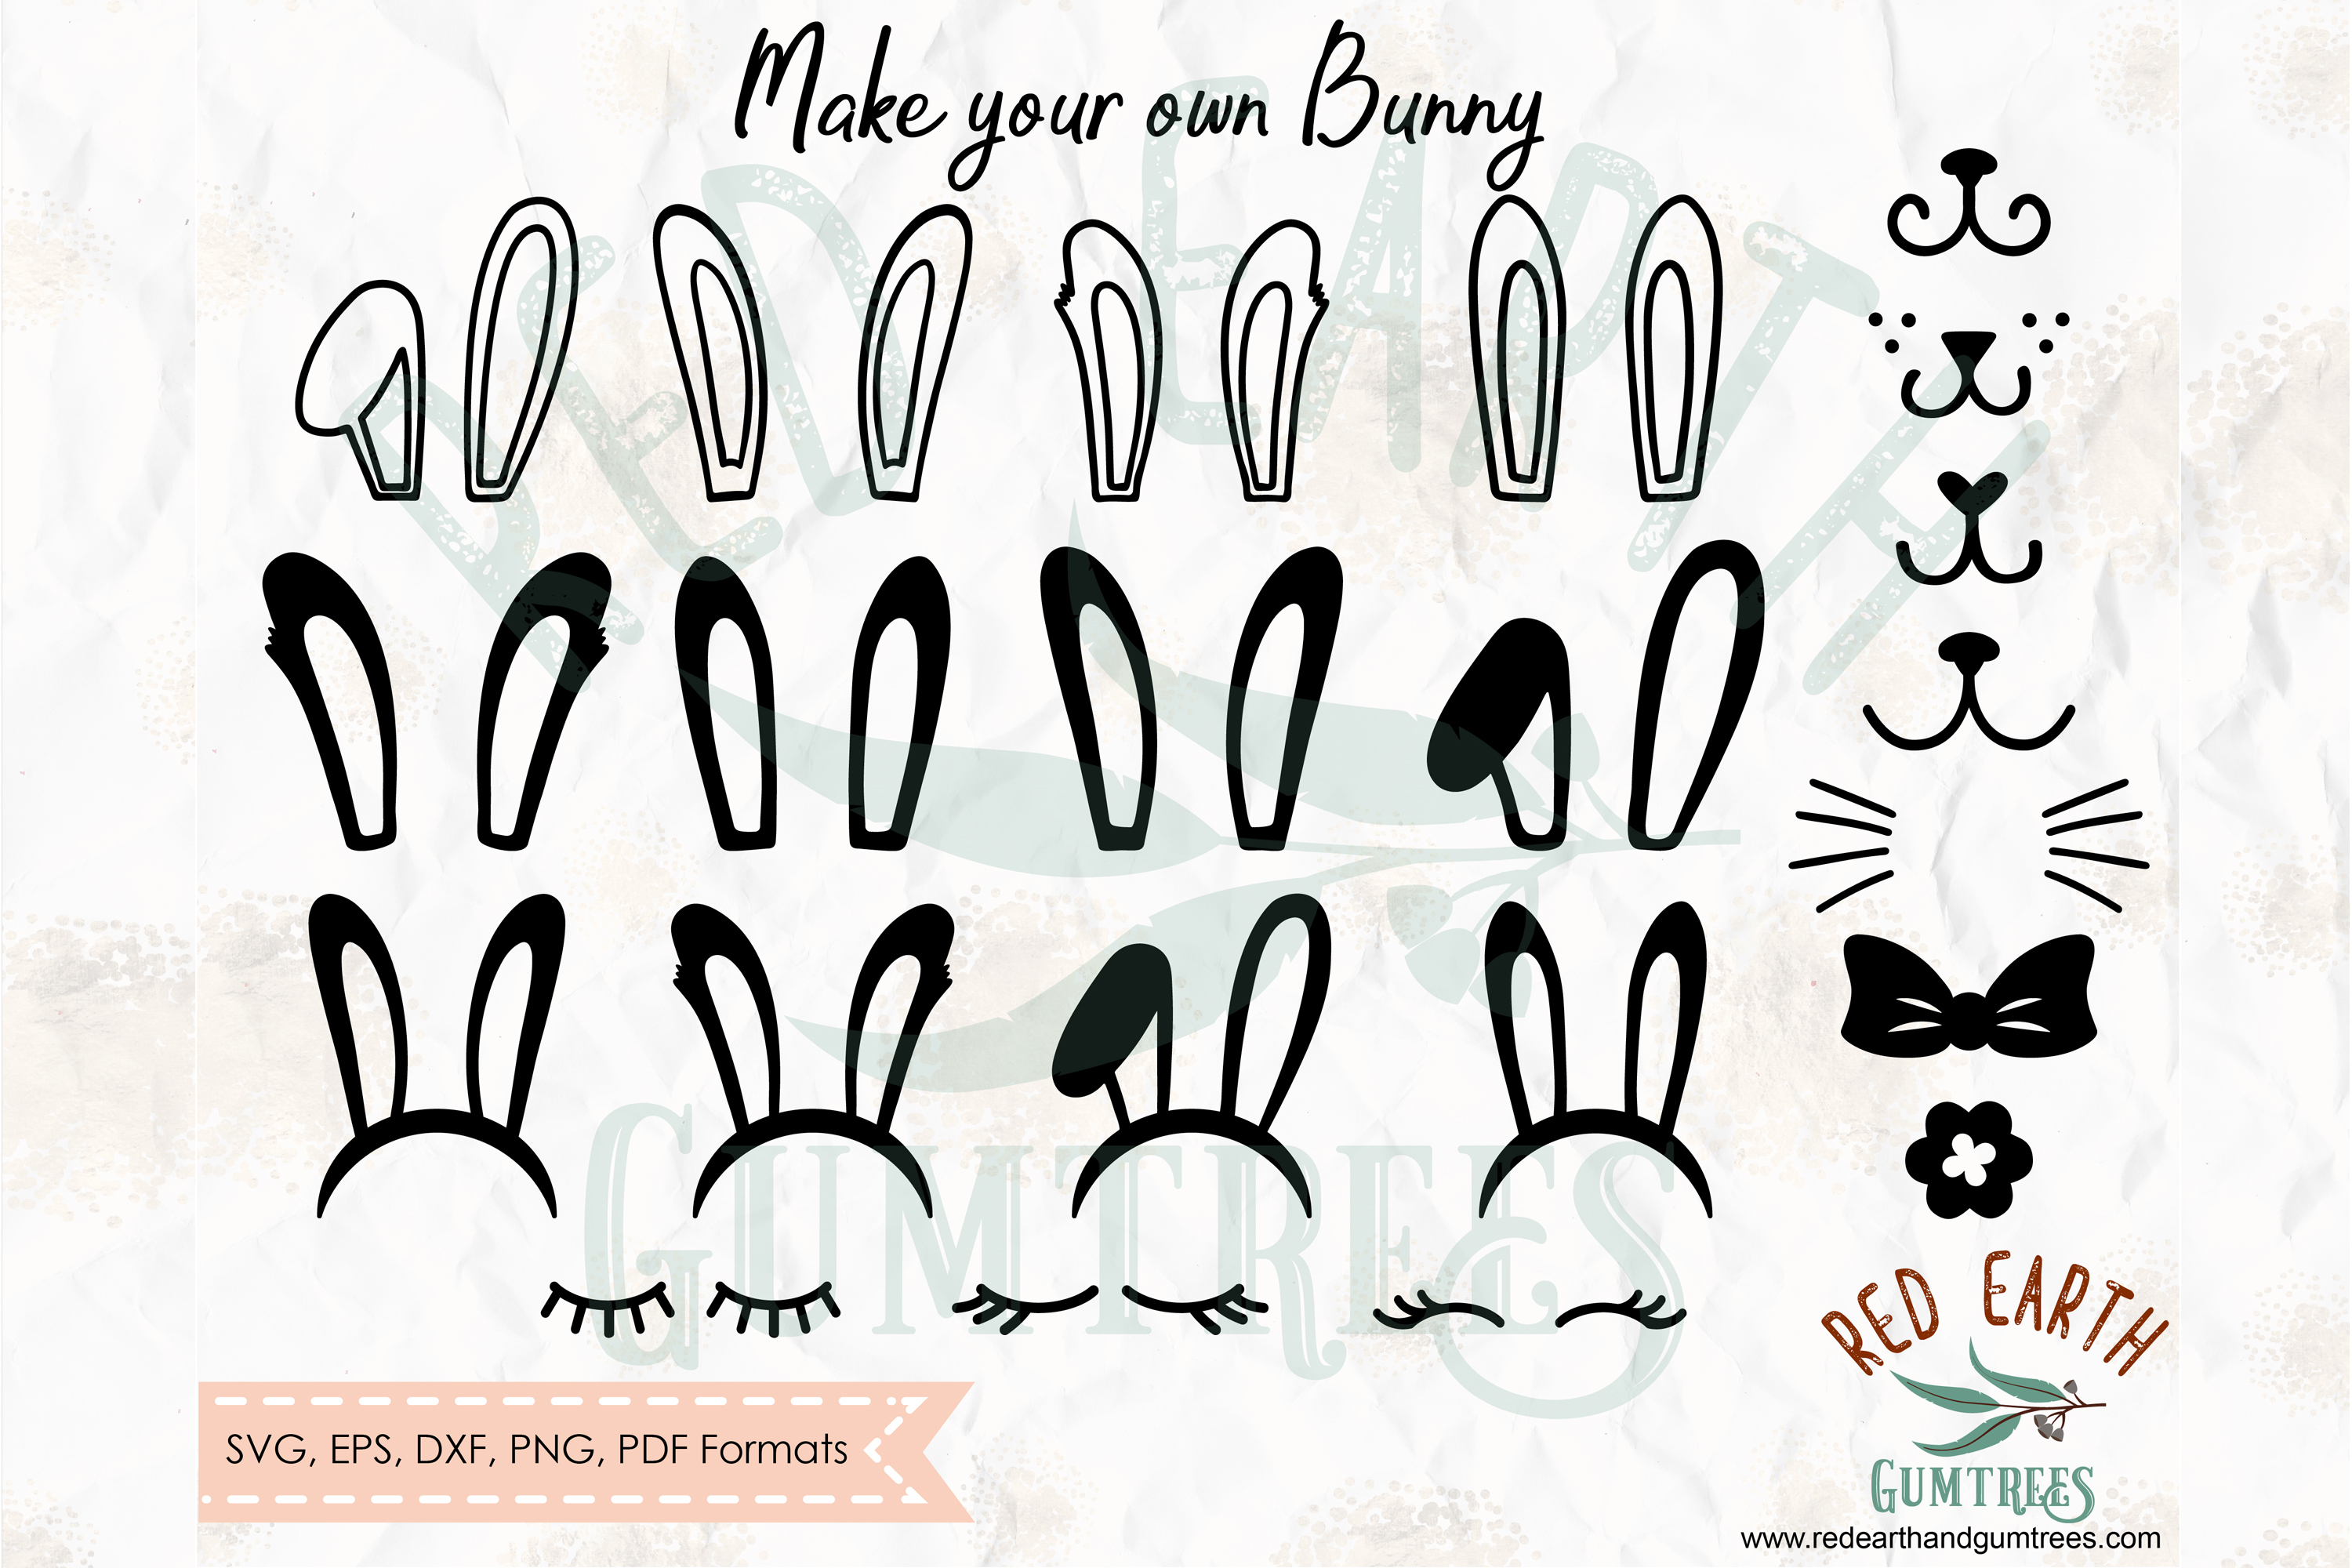 Download Make your own Easter rabbit, bunny ears in SVG,DXF,PNG,EPS